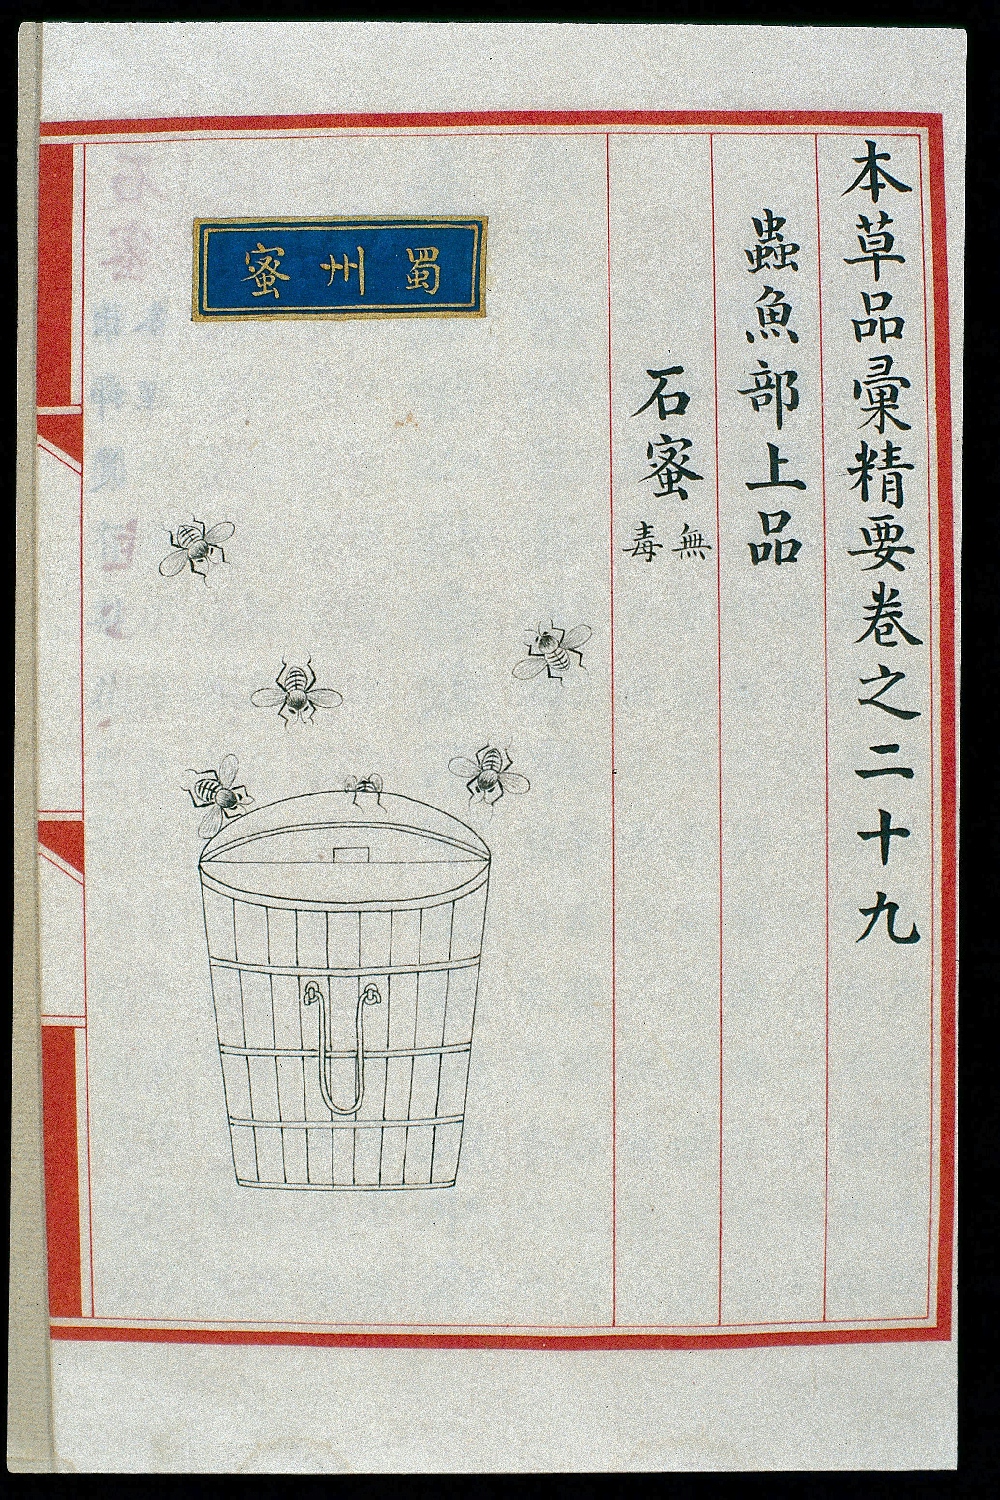 Copy of a woodblock printed page from a 16th-century Chinese materia medica book. The page had a red ink border within which, and on the right half of the page are three columns containing Chinese caligraphy. On the left half of the page is an illustration of a bee hive shaped like a wooden barrell with a lid. Six bees fly randomly above the hive.